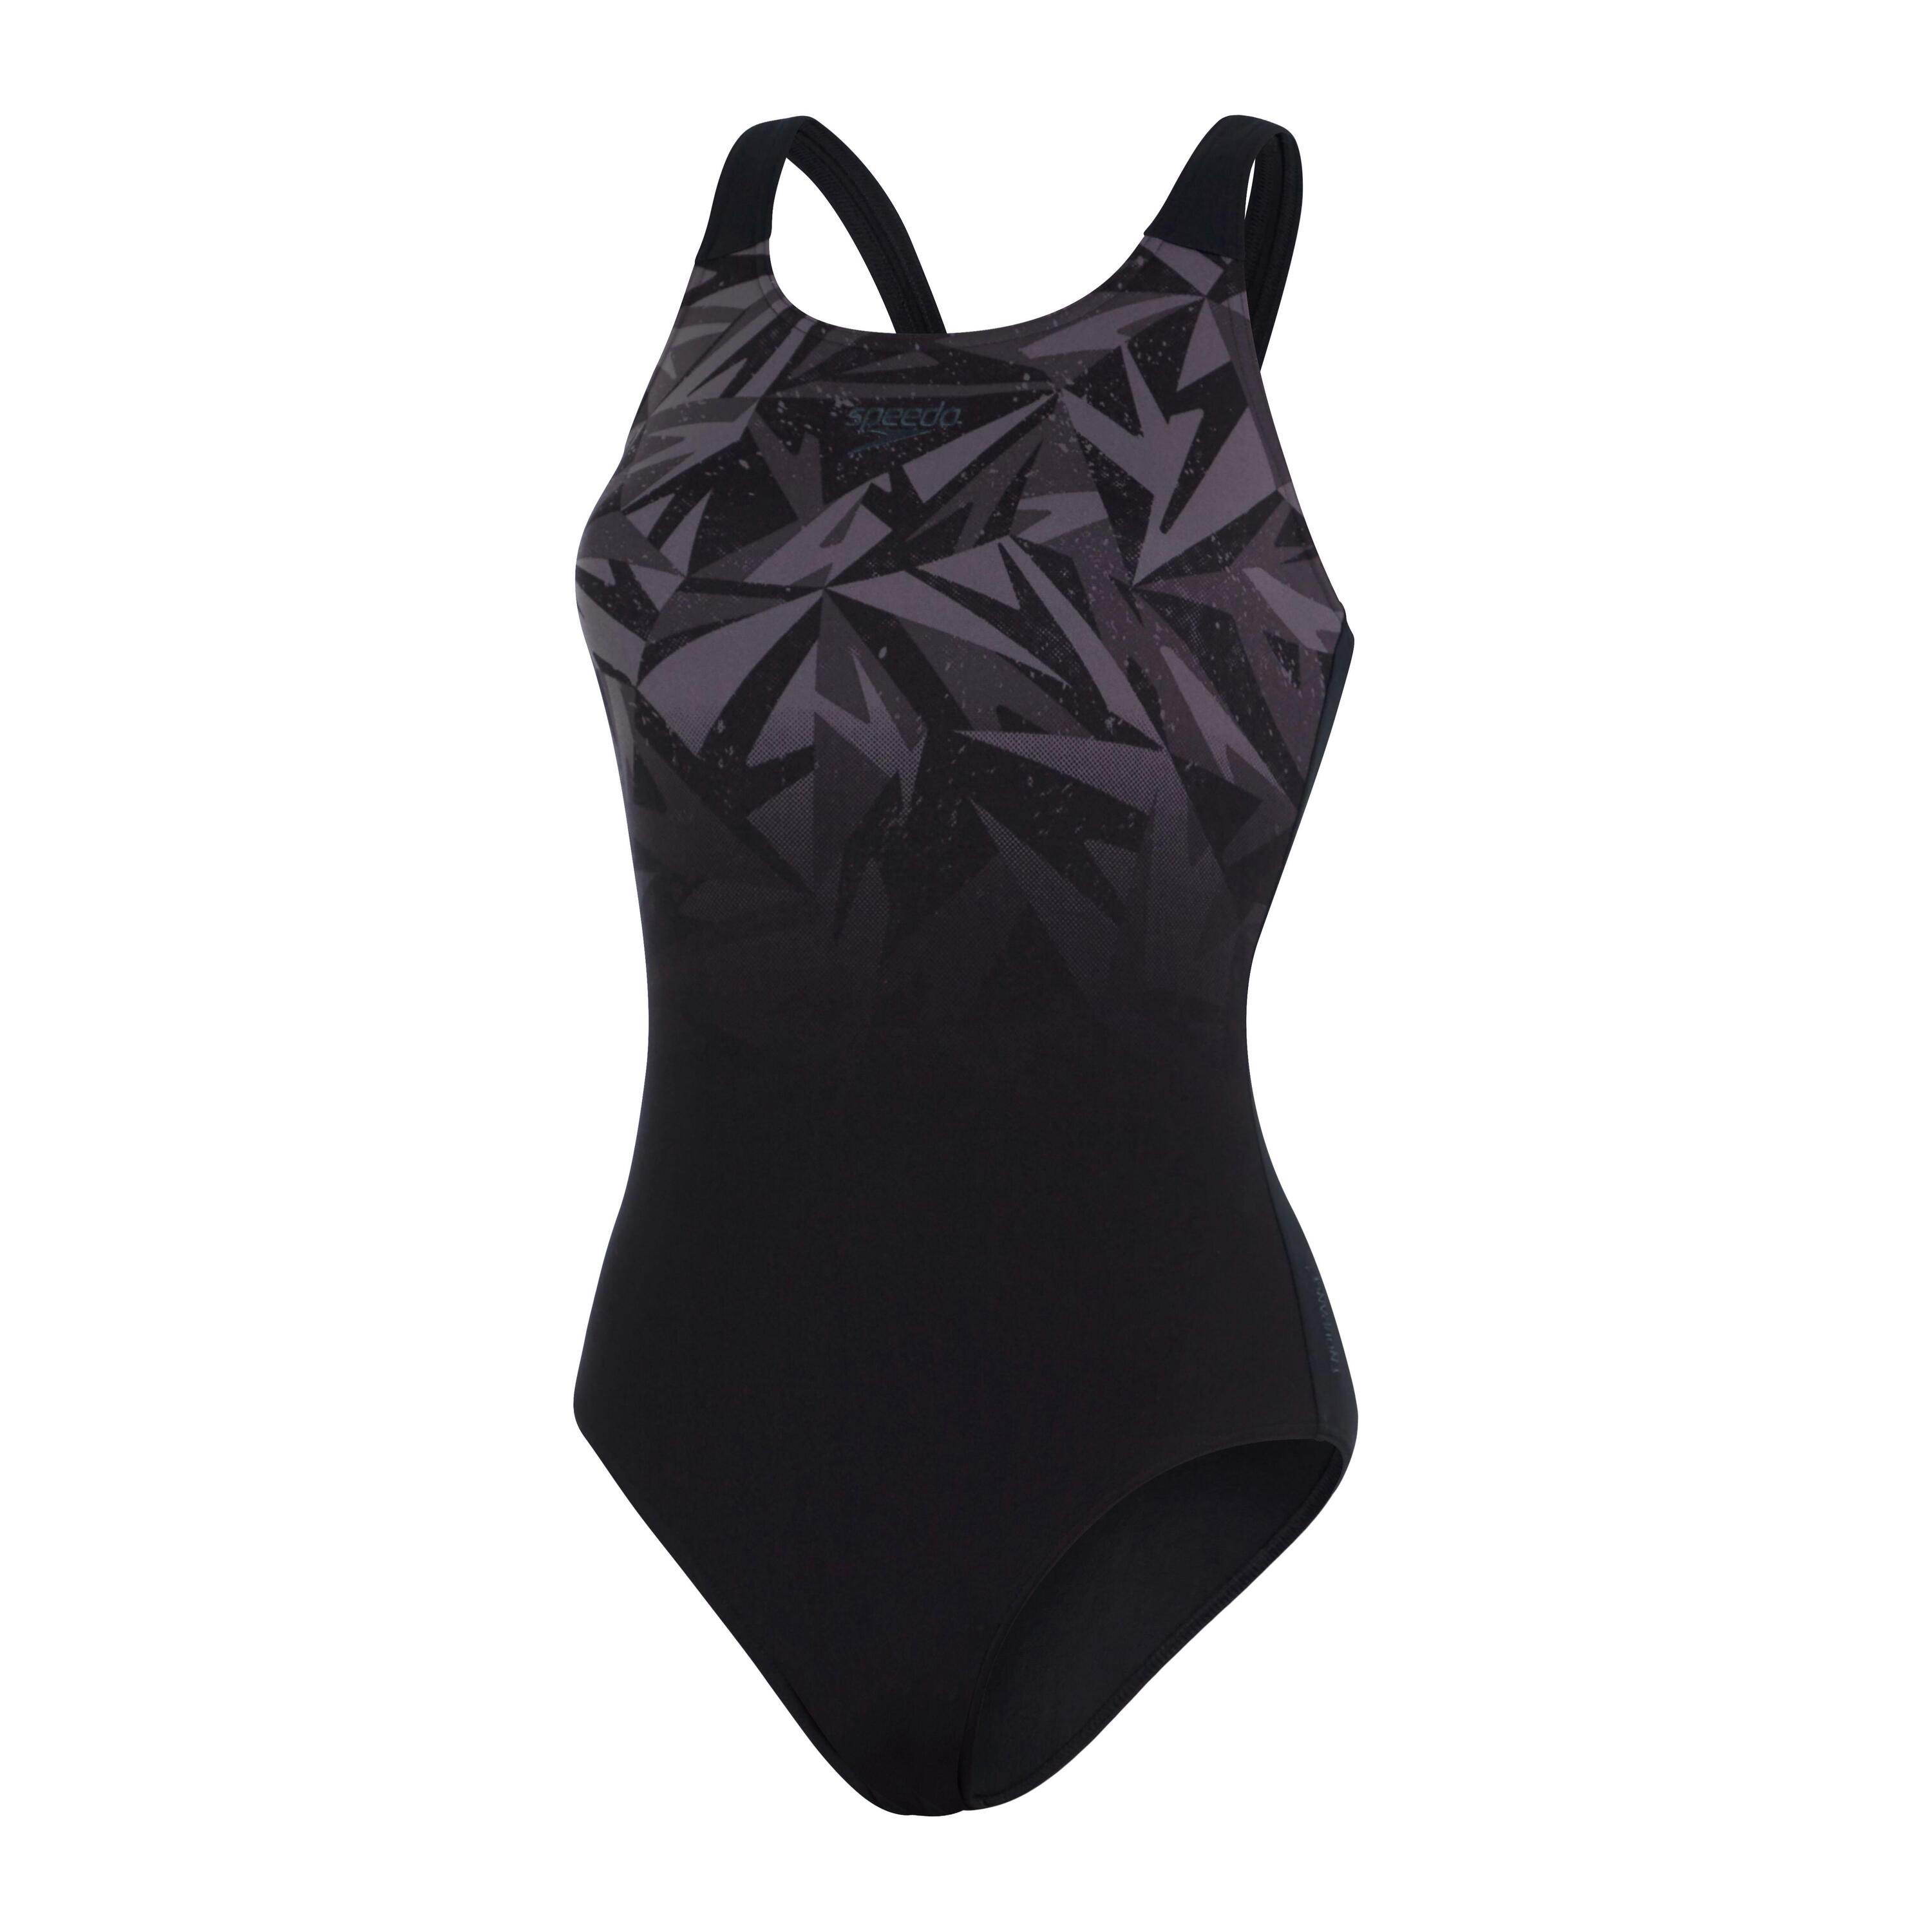 Hyperboom Placement Muscleback Adult Female Swimsuit Black/Grey 7/7